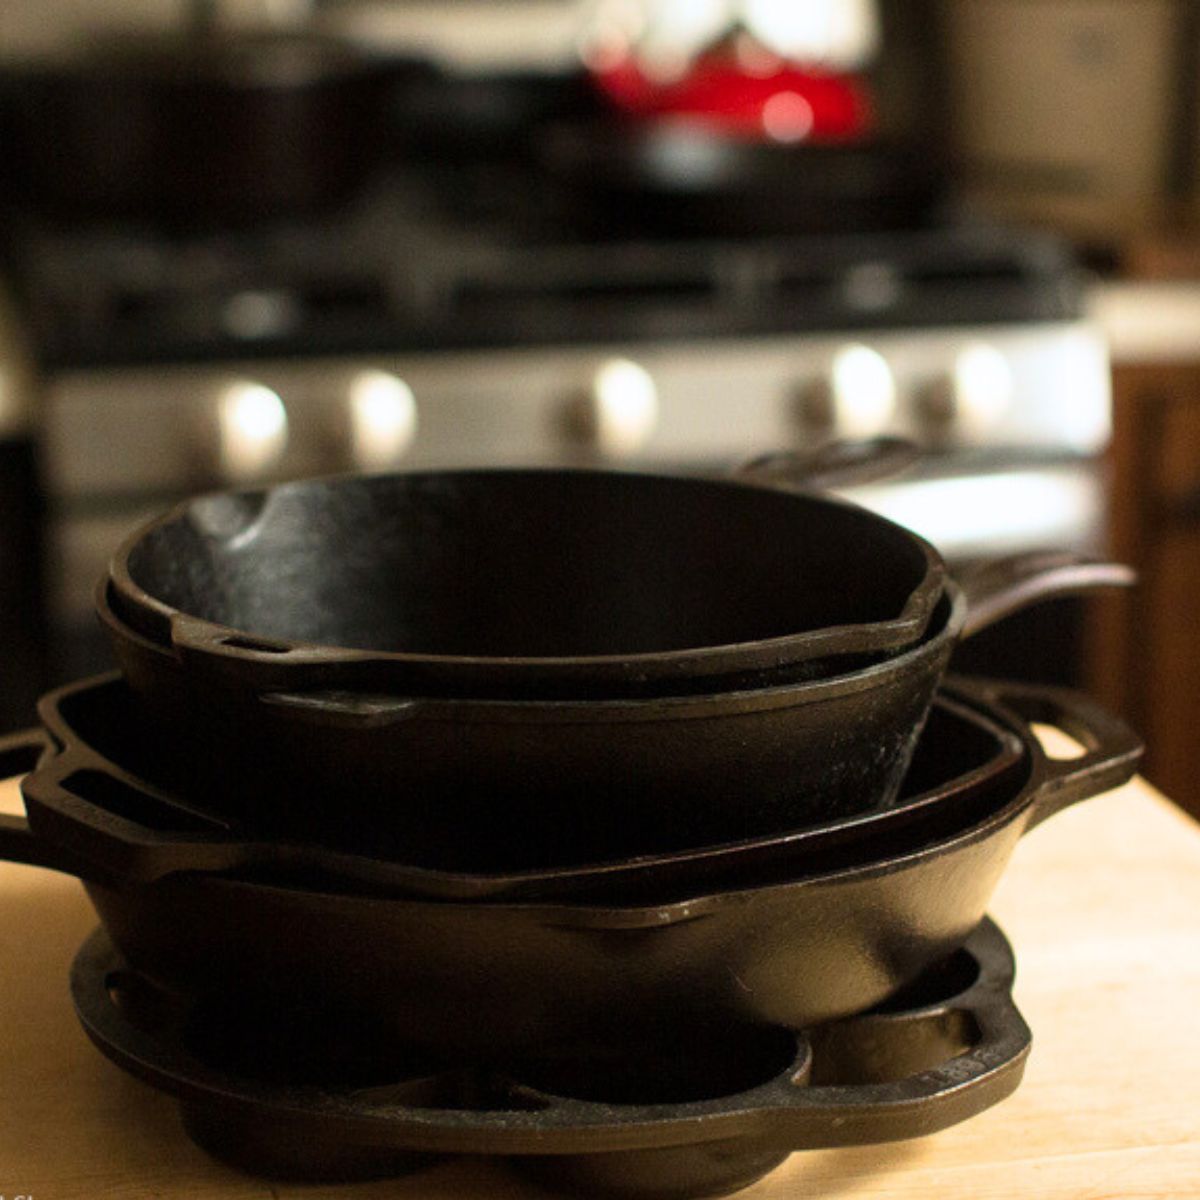 How to Care for Cast-iron Cookware is Easier than You Think